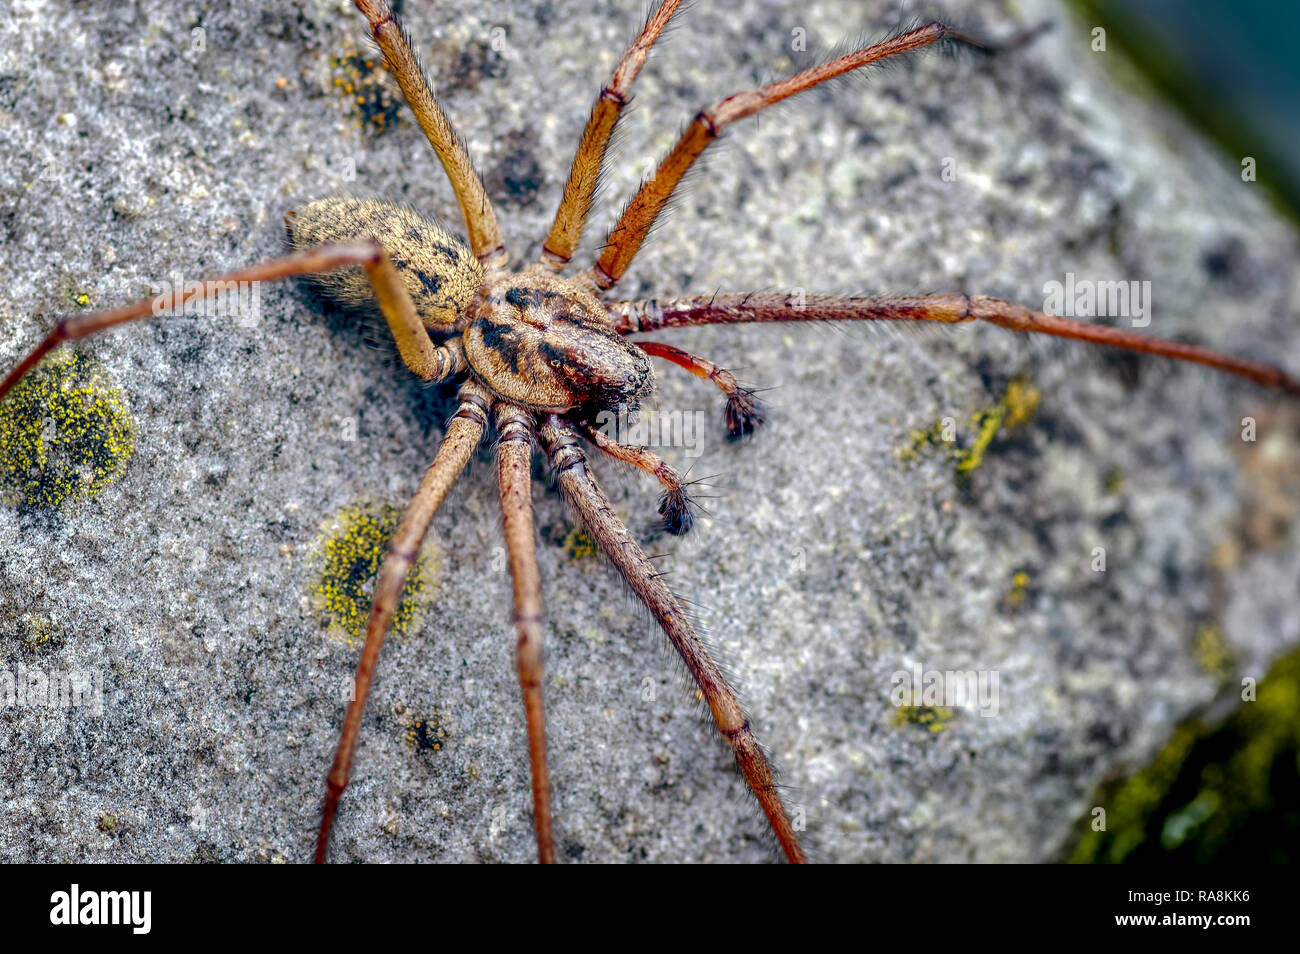 This is a male Giant House Spider Tegenaria gigantea now called Eratigena atrica. It is typical to see the male as the female remains hidden. Stock Photo